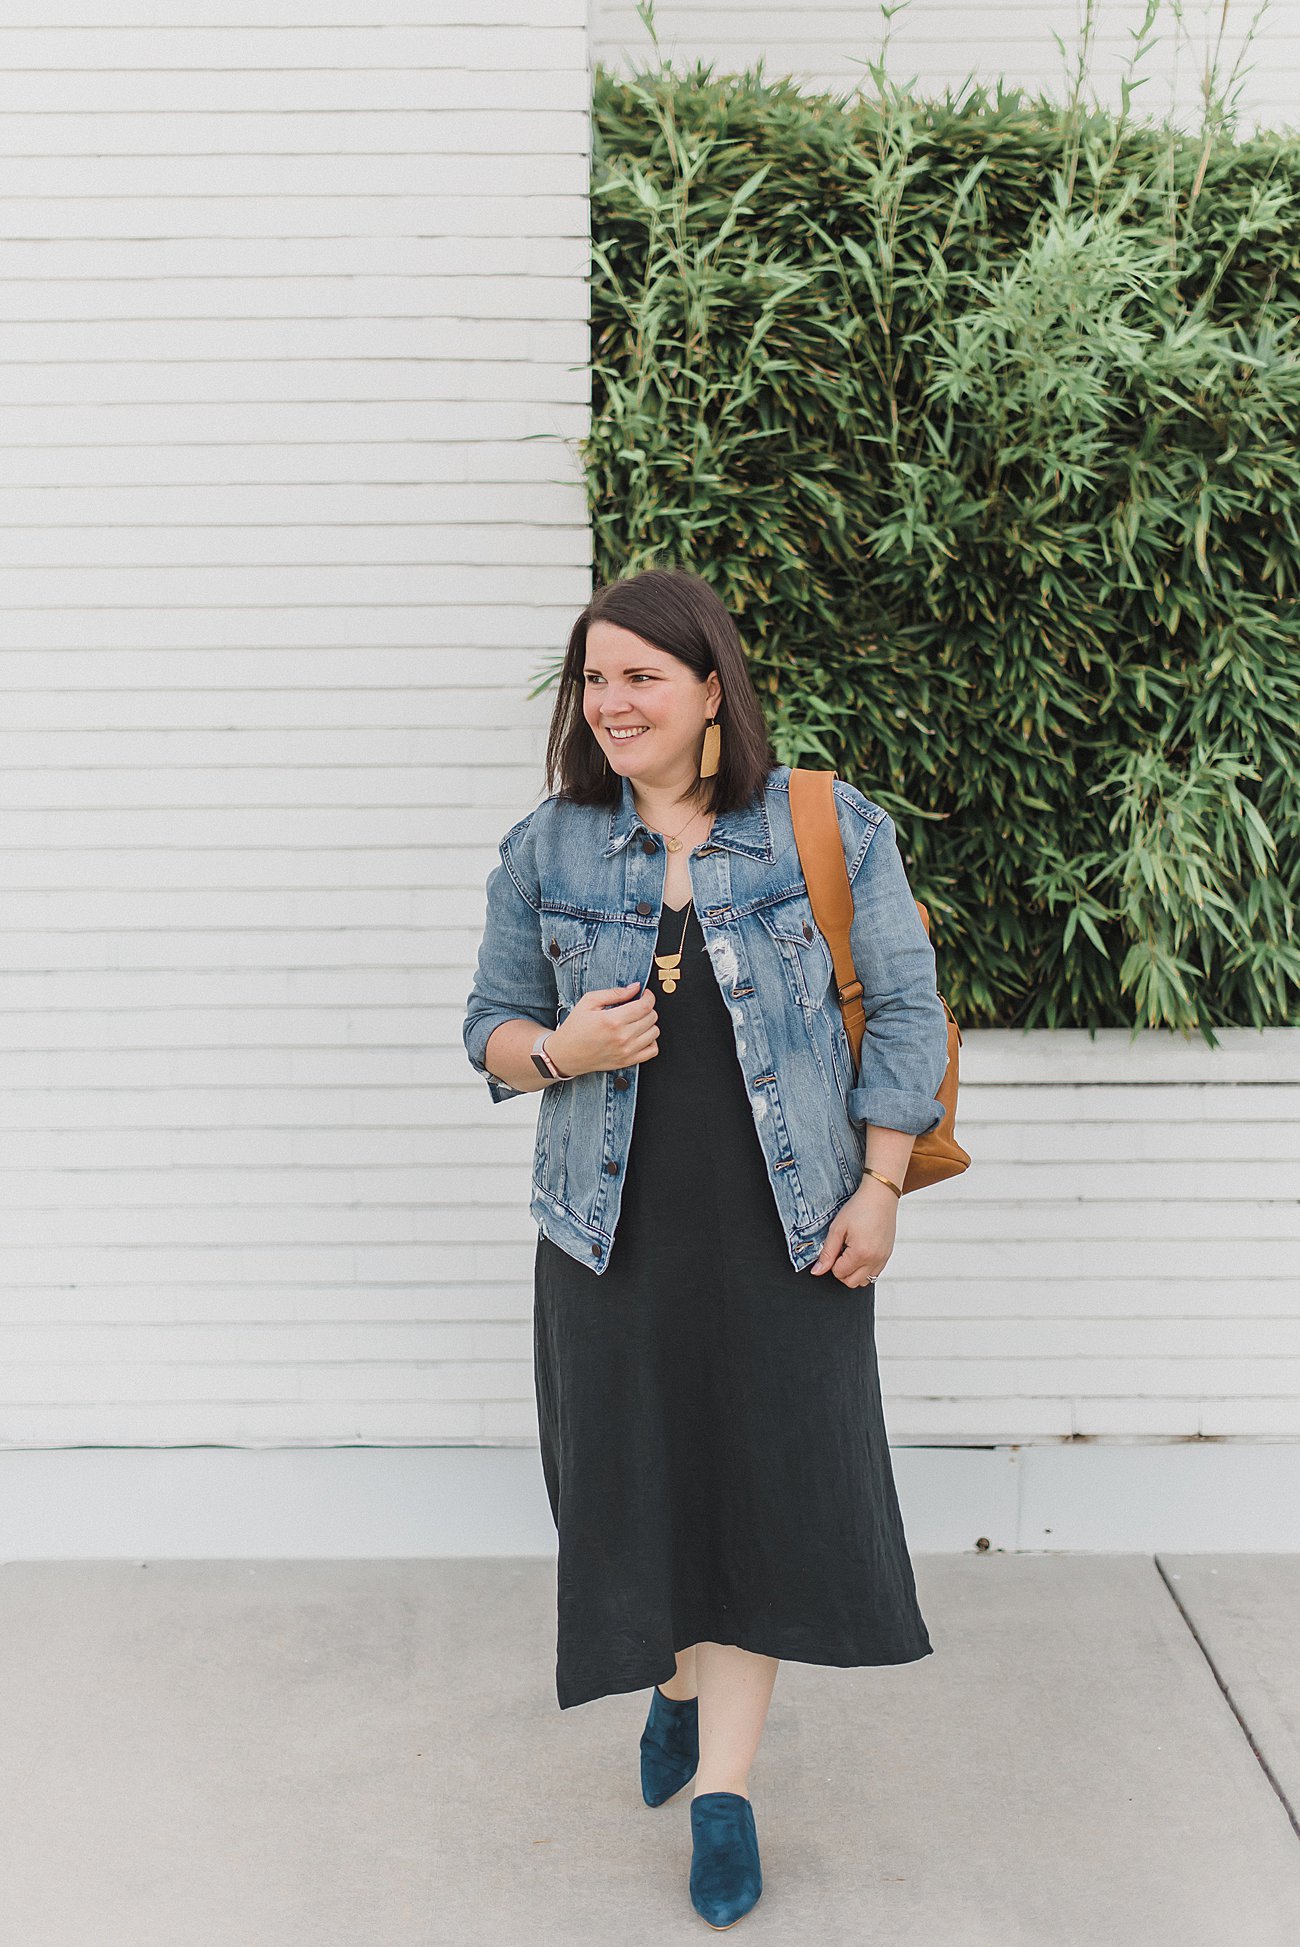 ABLE Utility Dress, ABLE denim jacket, ABLE rojas mule shoes - ethical fall fashion - how to style a t-shirt dress (1)